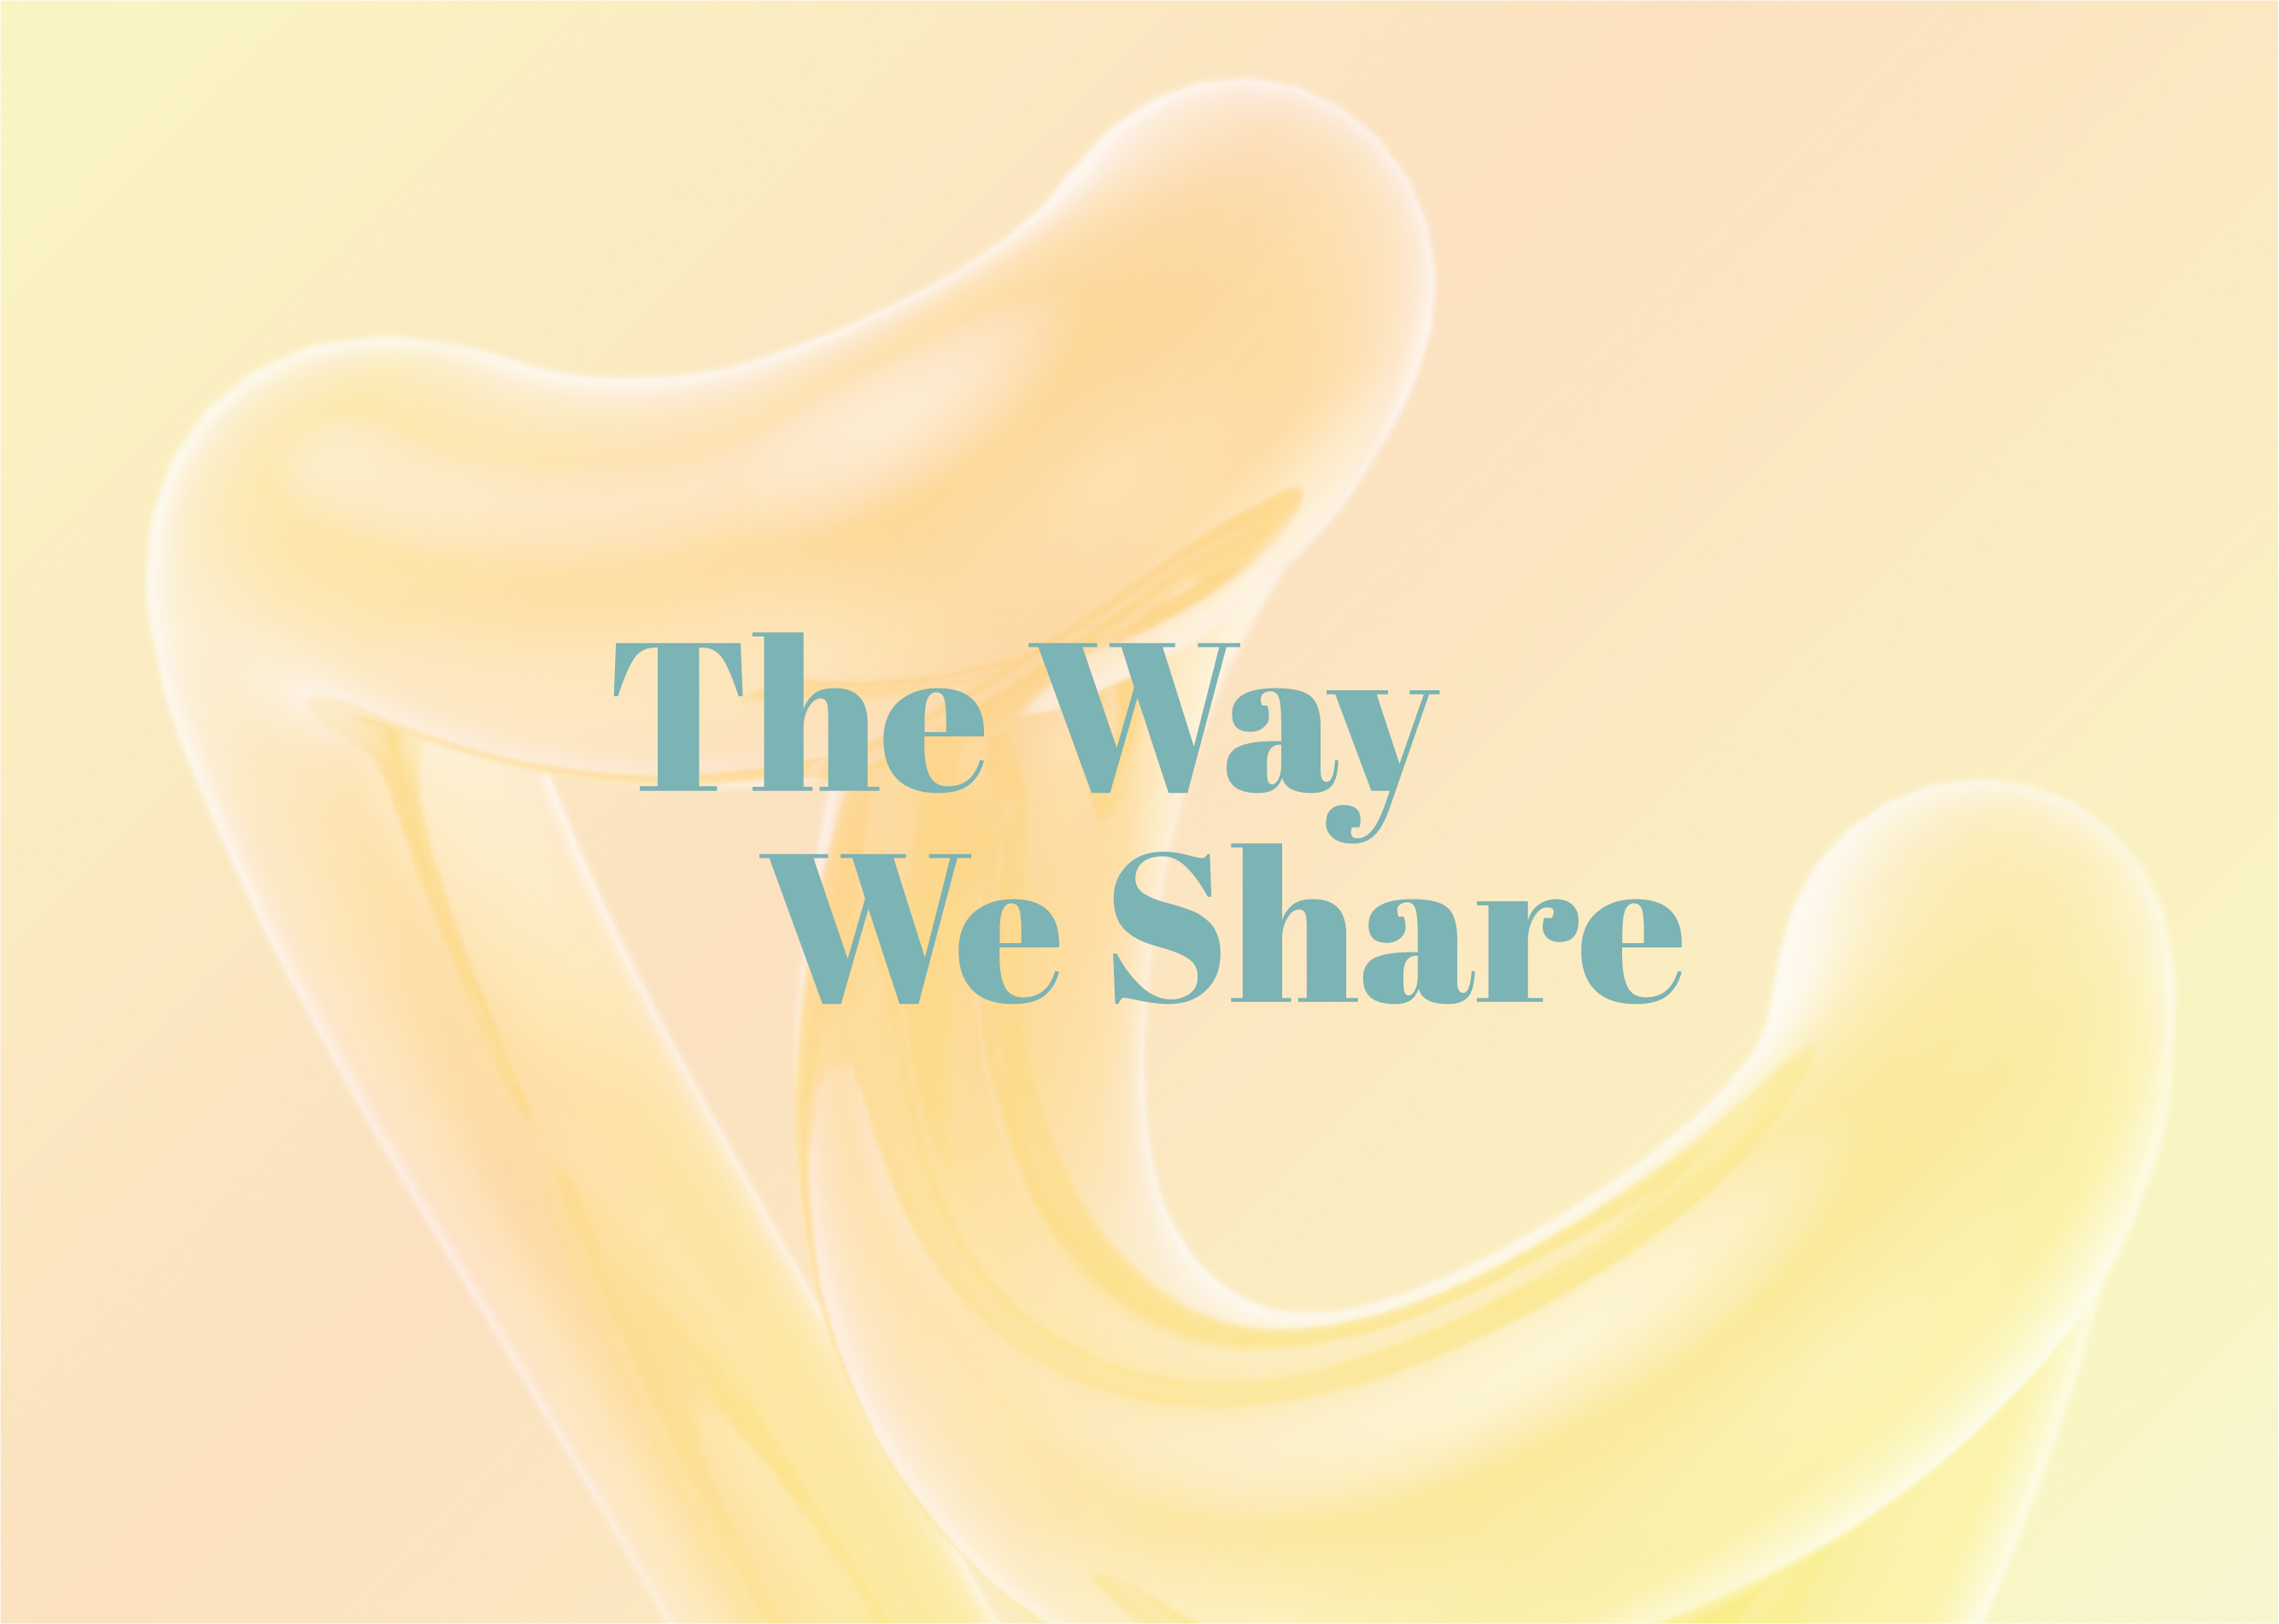 The Way We Share